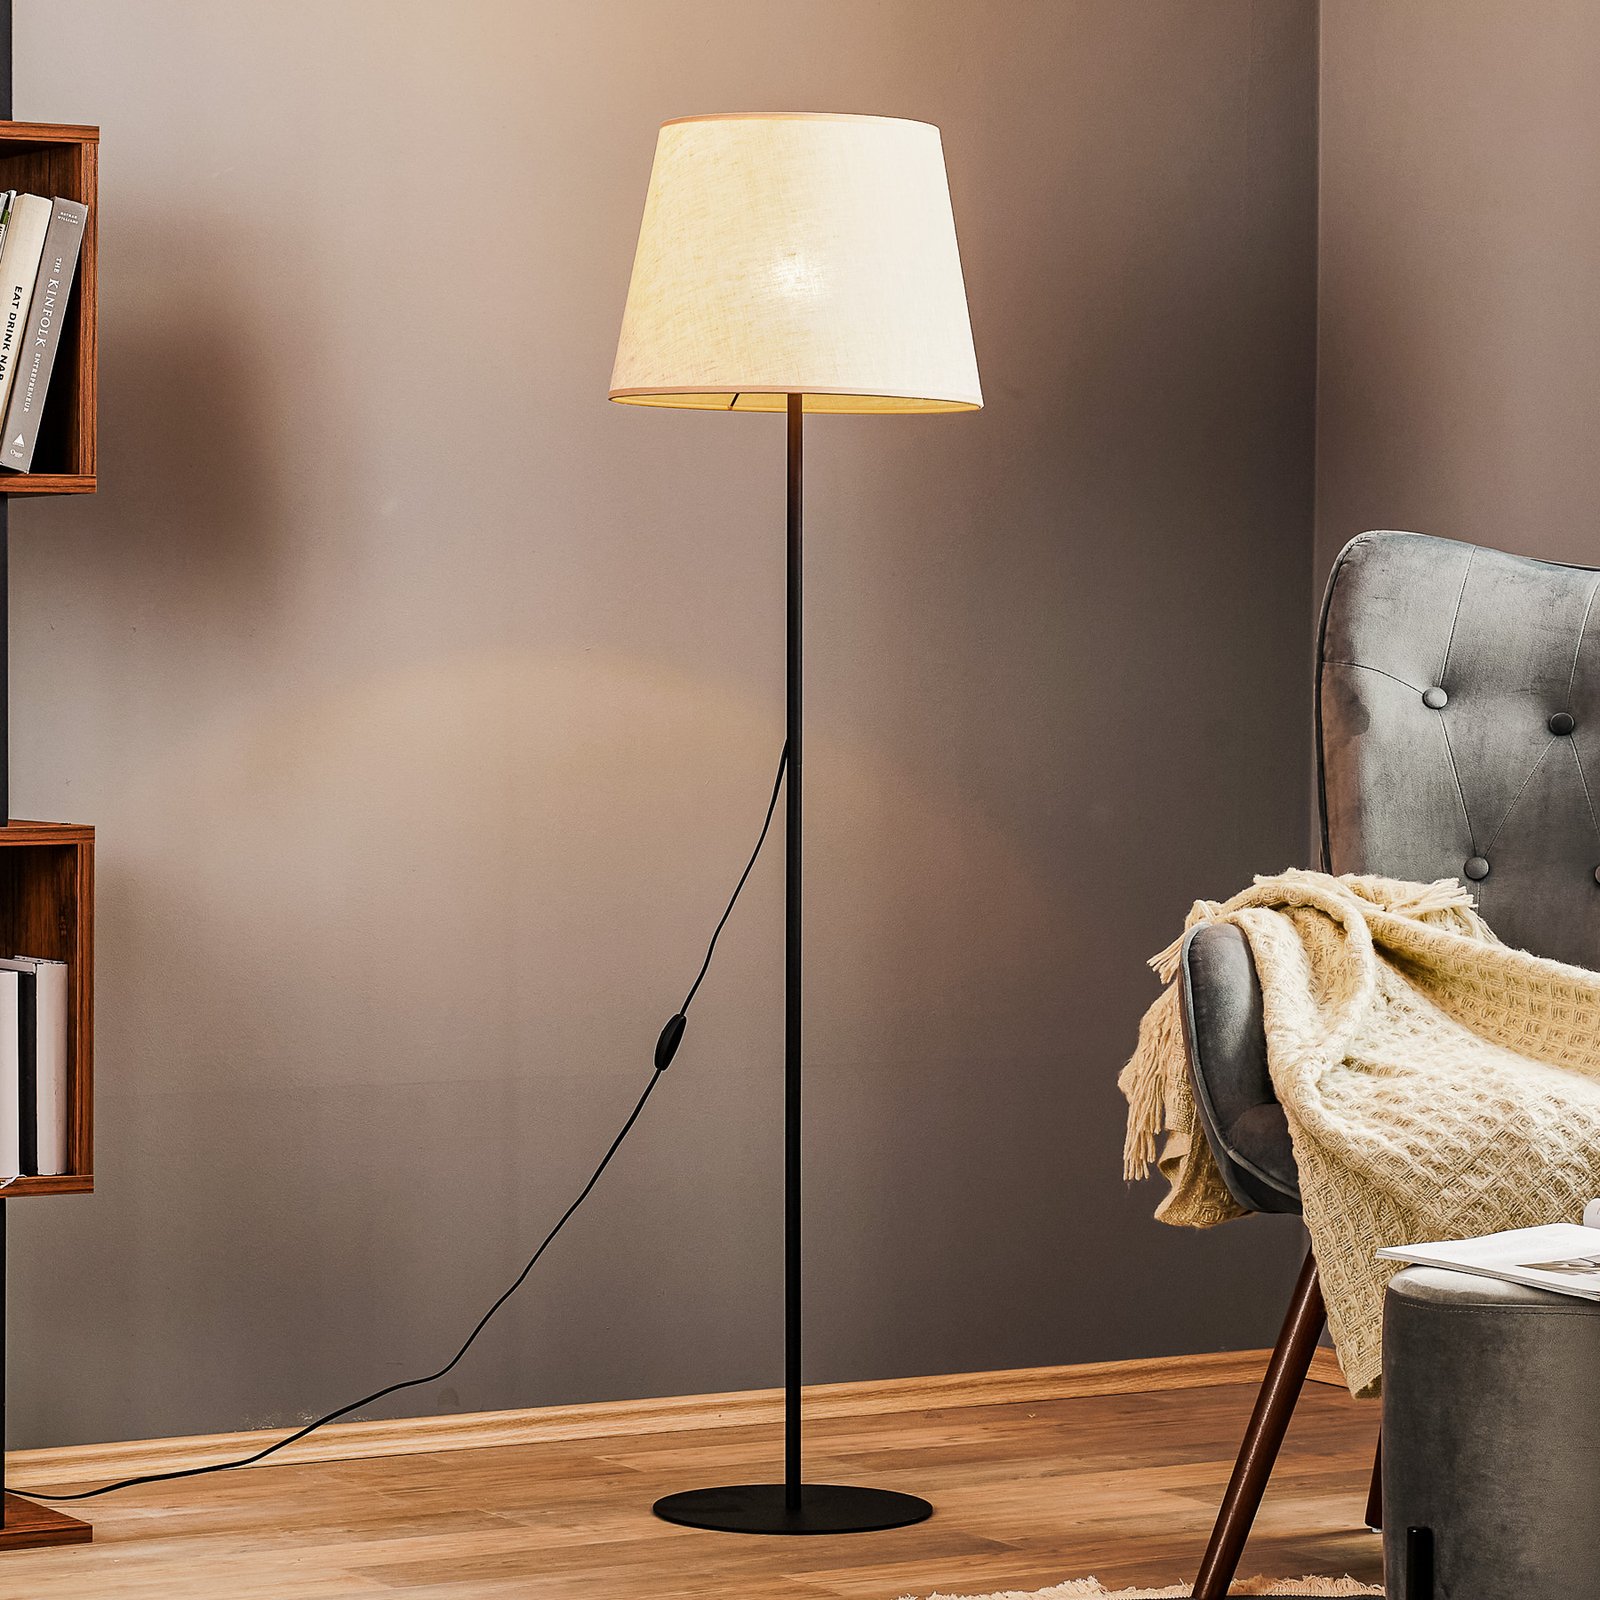 Chicago floor lamp with a linen lampshade